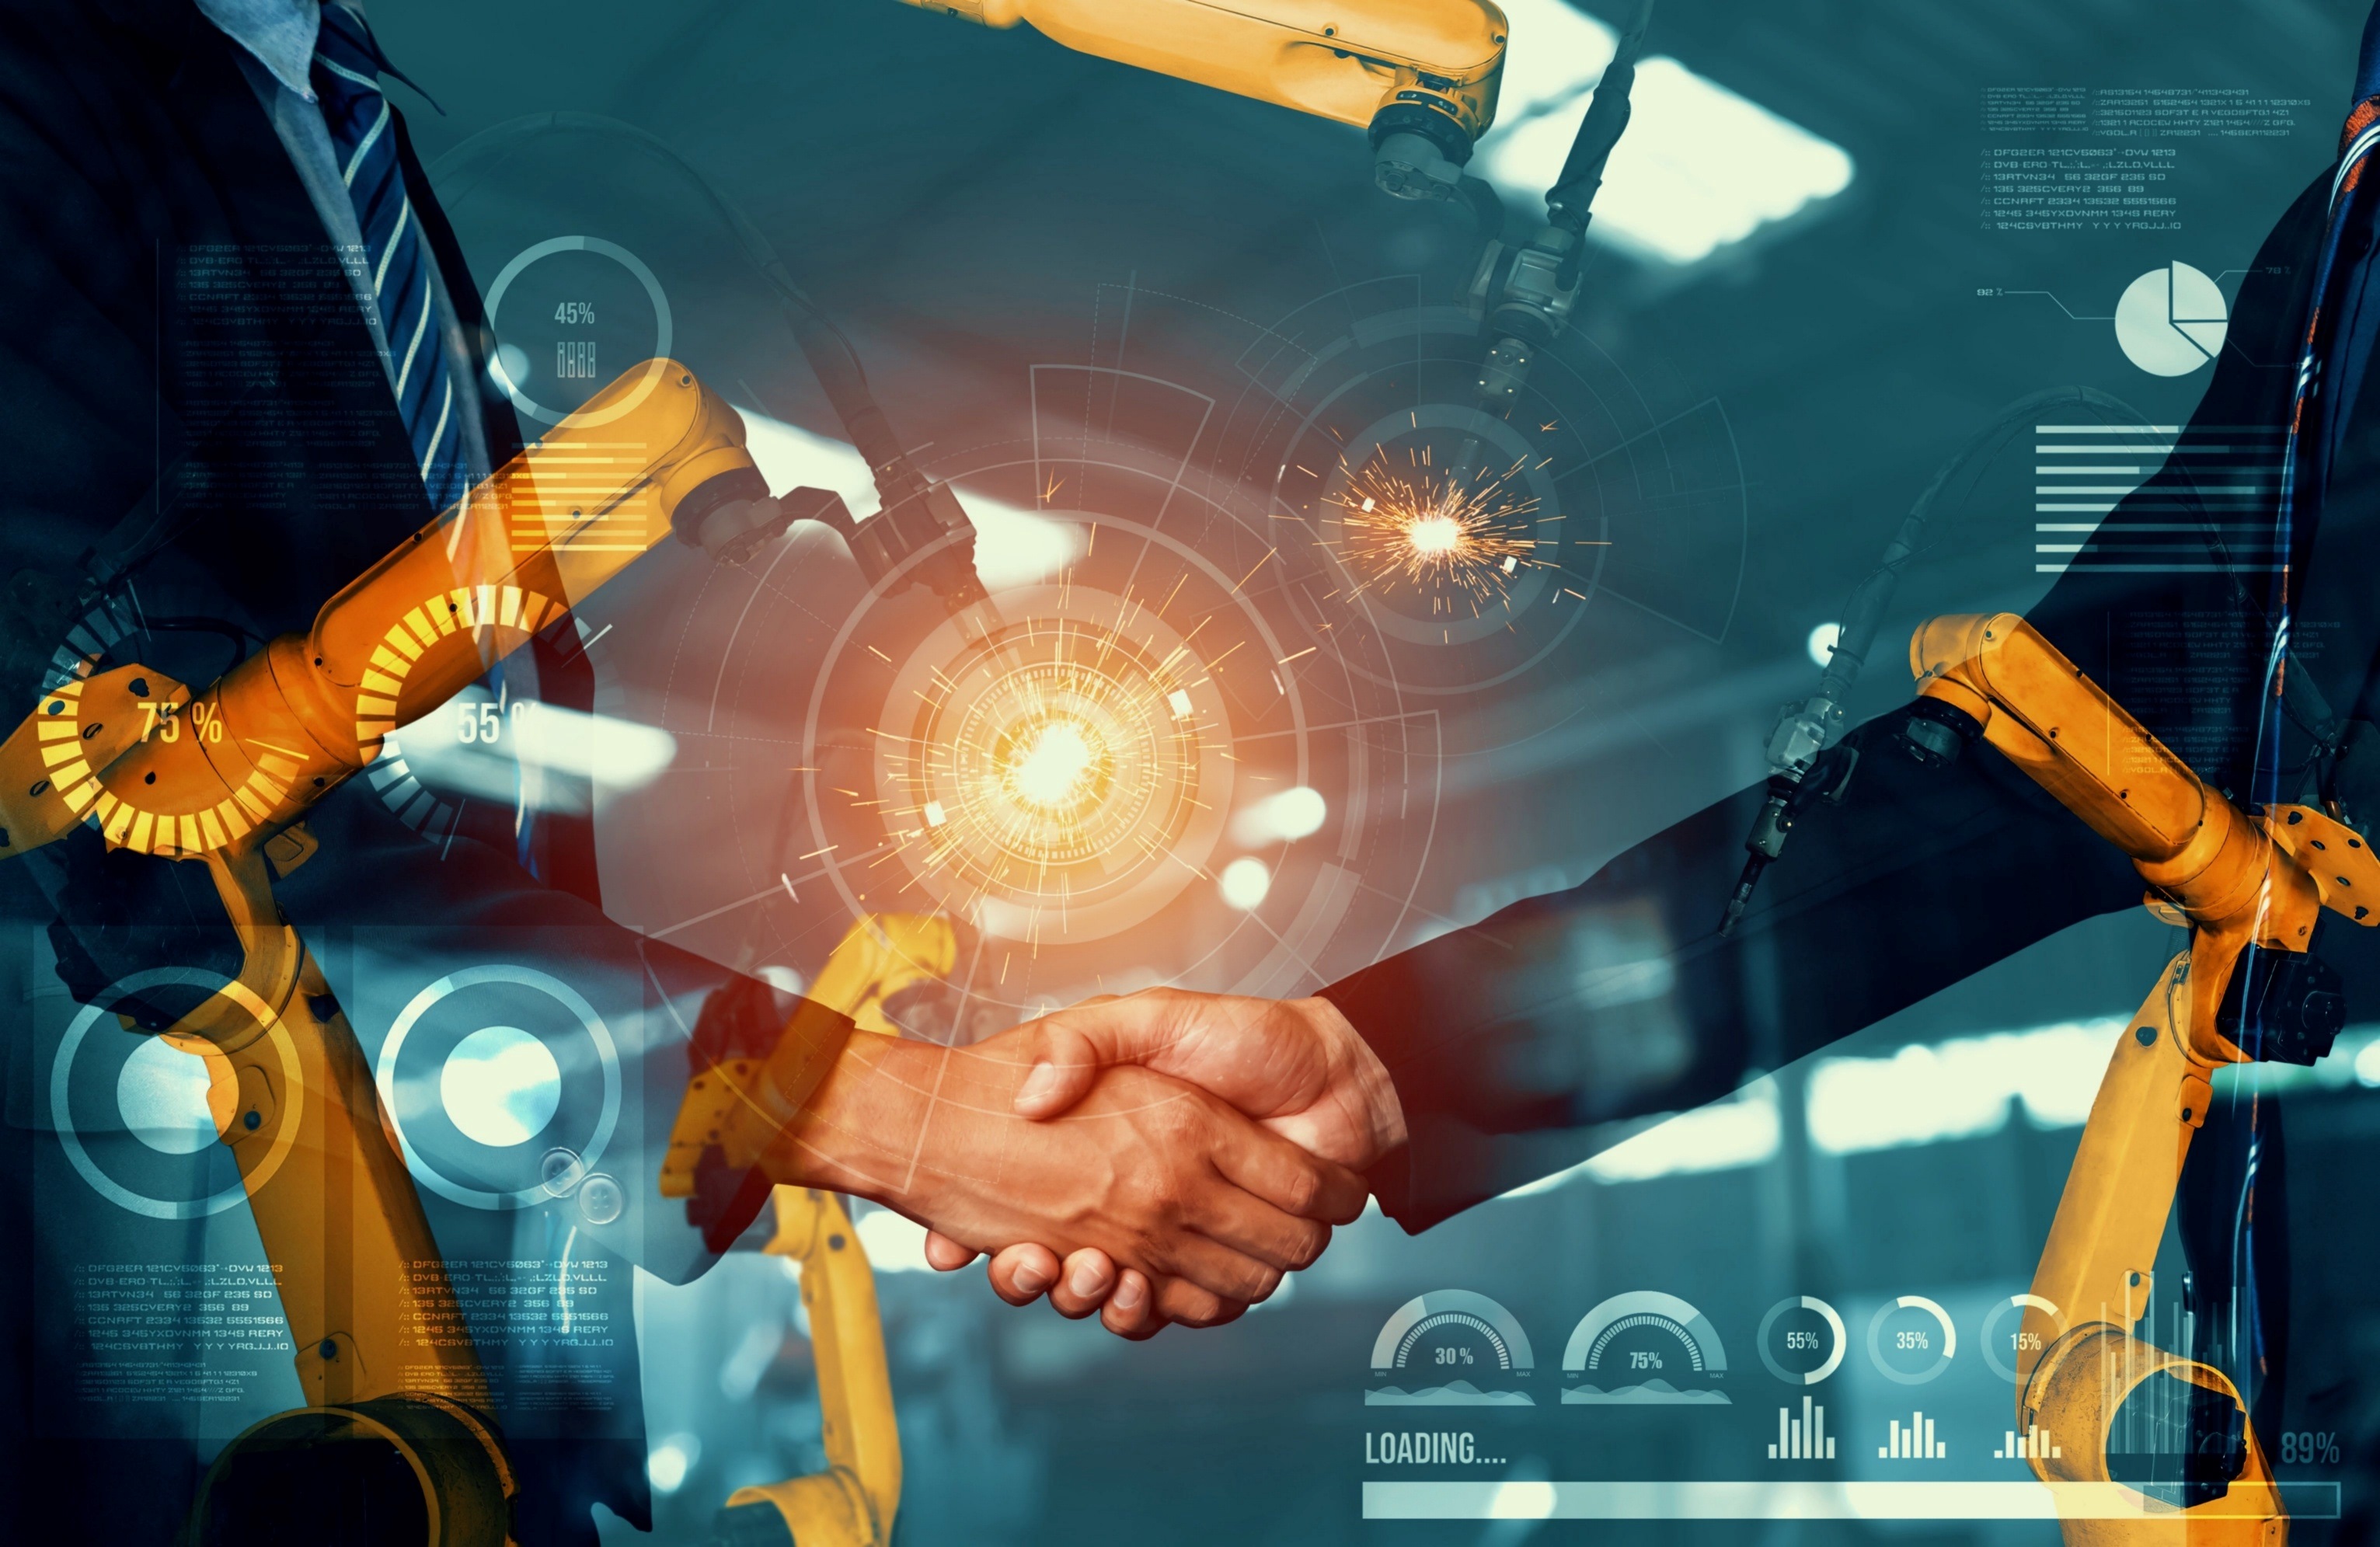 Photo collage, showing two people in suits shaking hands, superimposed over several robots with welding attachments. There are also computer graphics with sparks flying out of them.